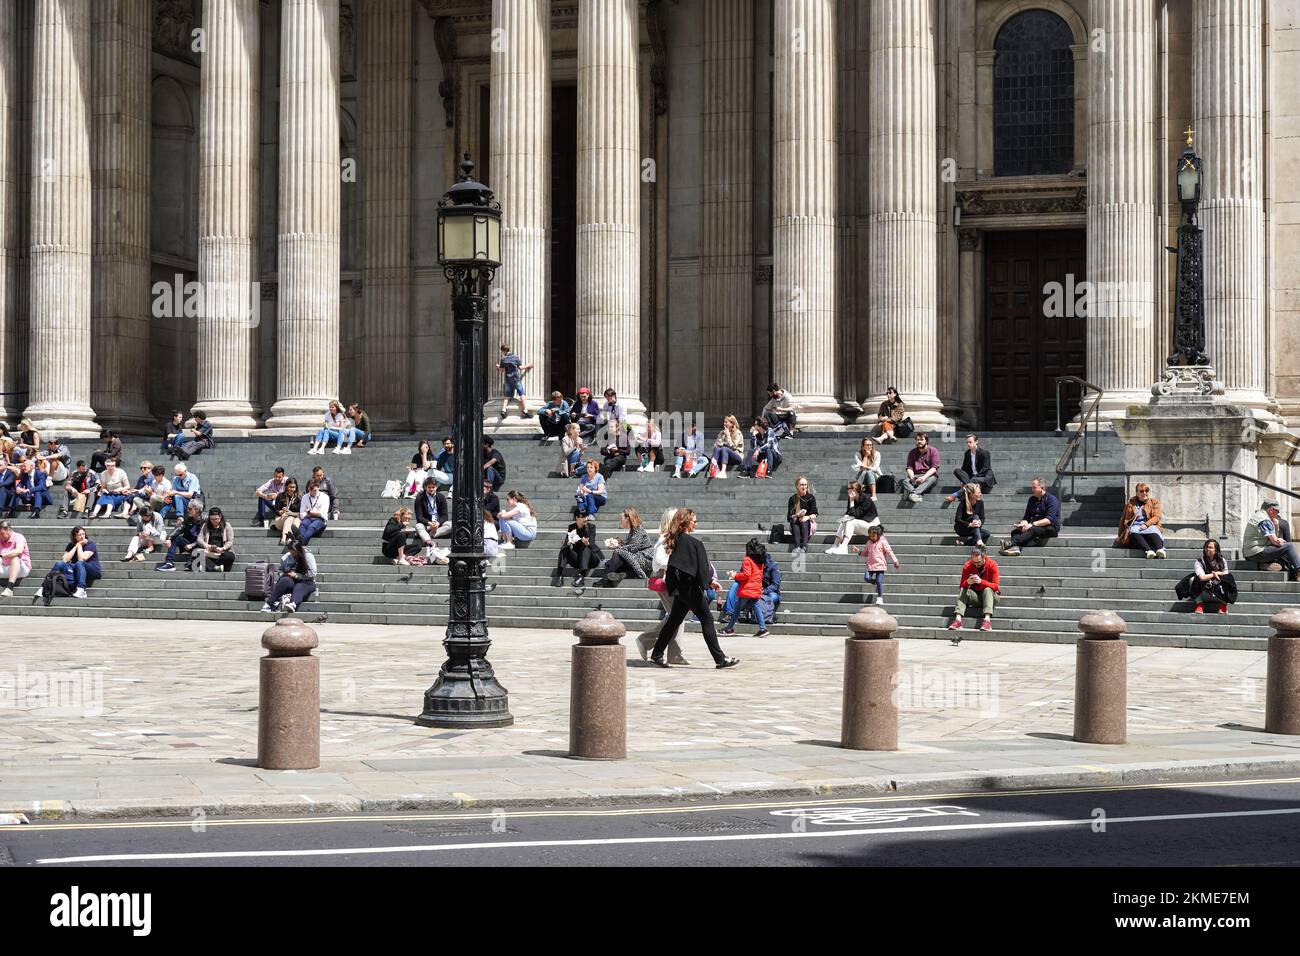 People enjoying sunny day in front of St Paul's Cathedral in London, England United Kingdom UK Stock Photo